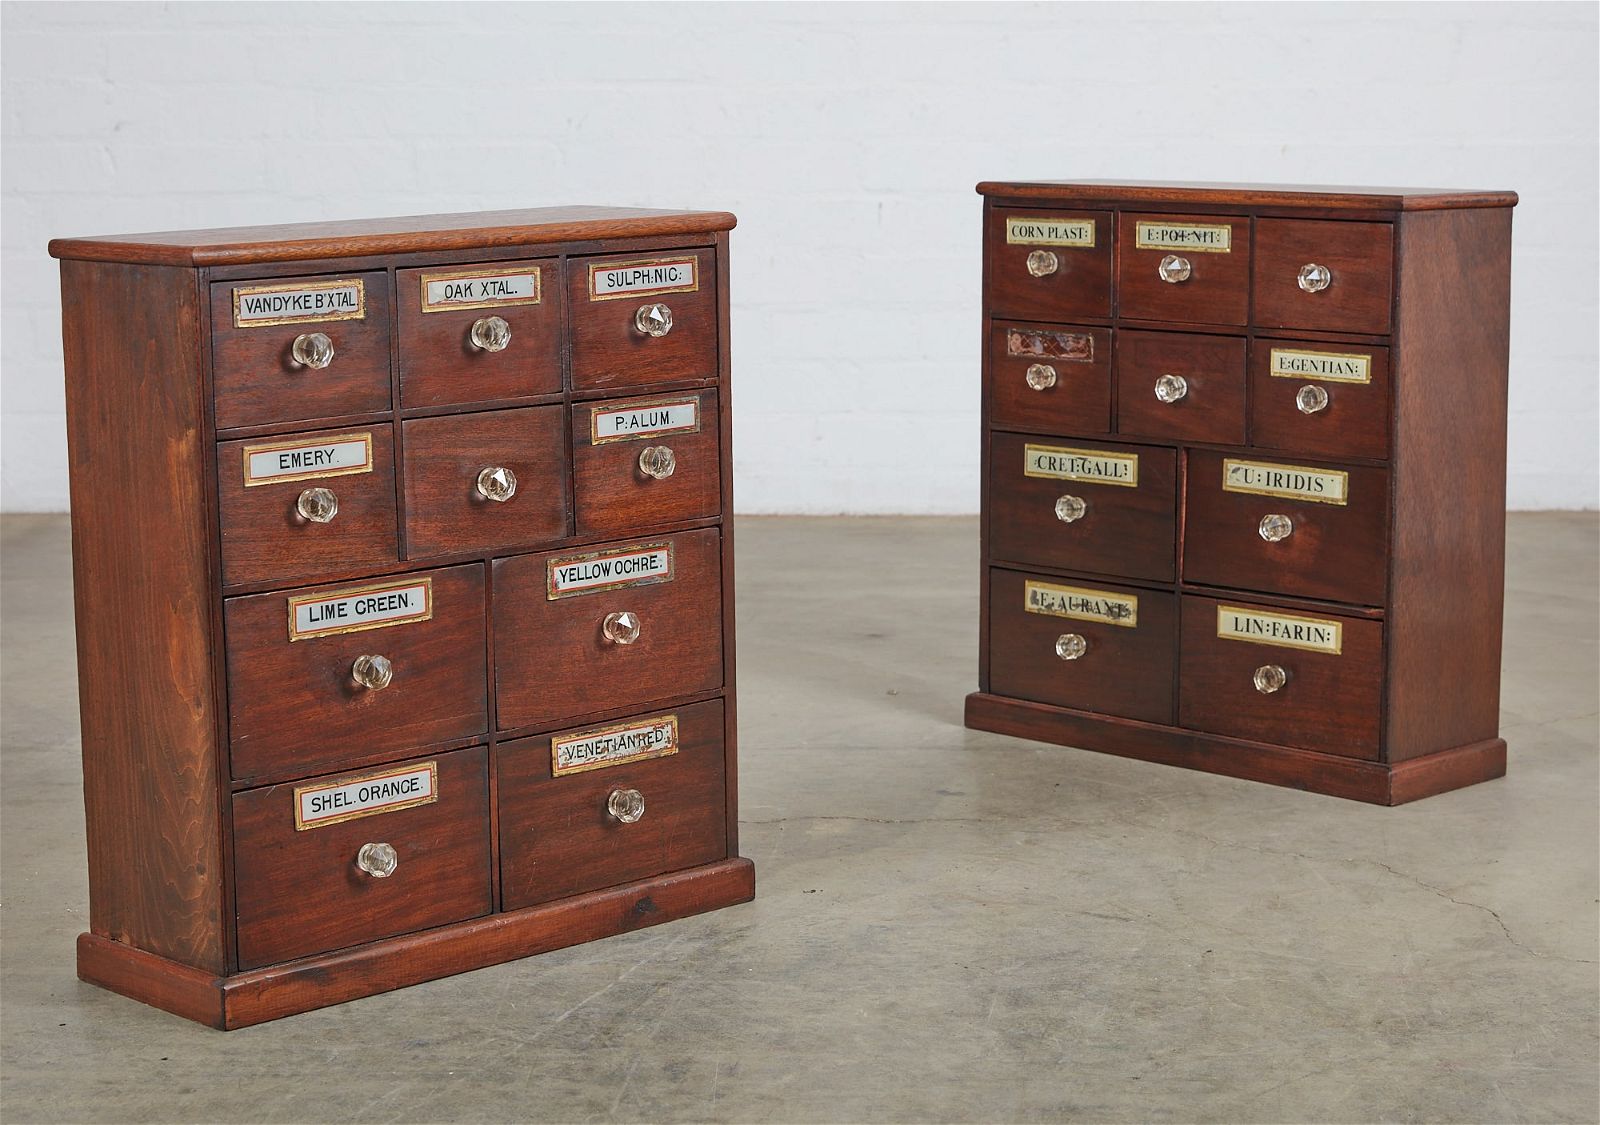 TWO APOTHECARY CABINETS 19TH CENTURYTwo 2fb38c8